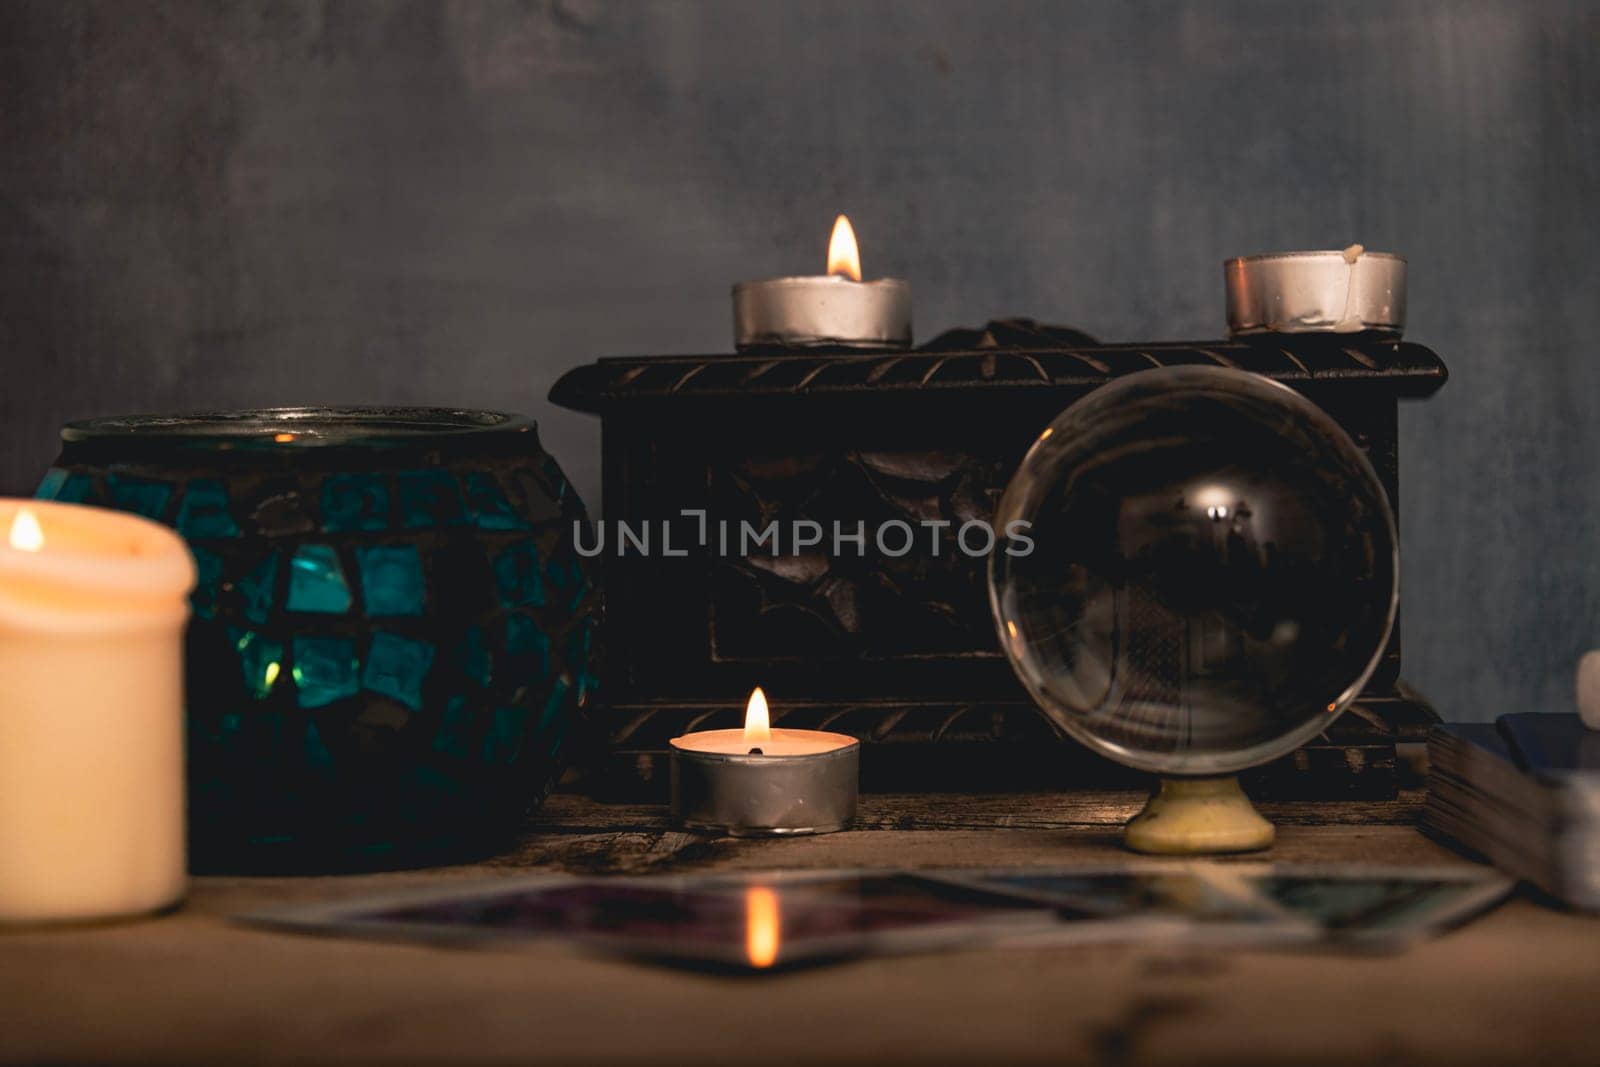 Close-up of a tarot card arrangement with a crystal ball and flickering candles on an aged wooden surface